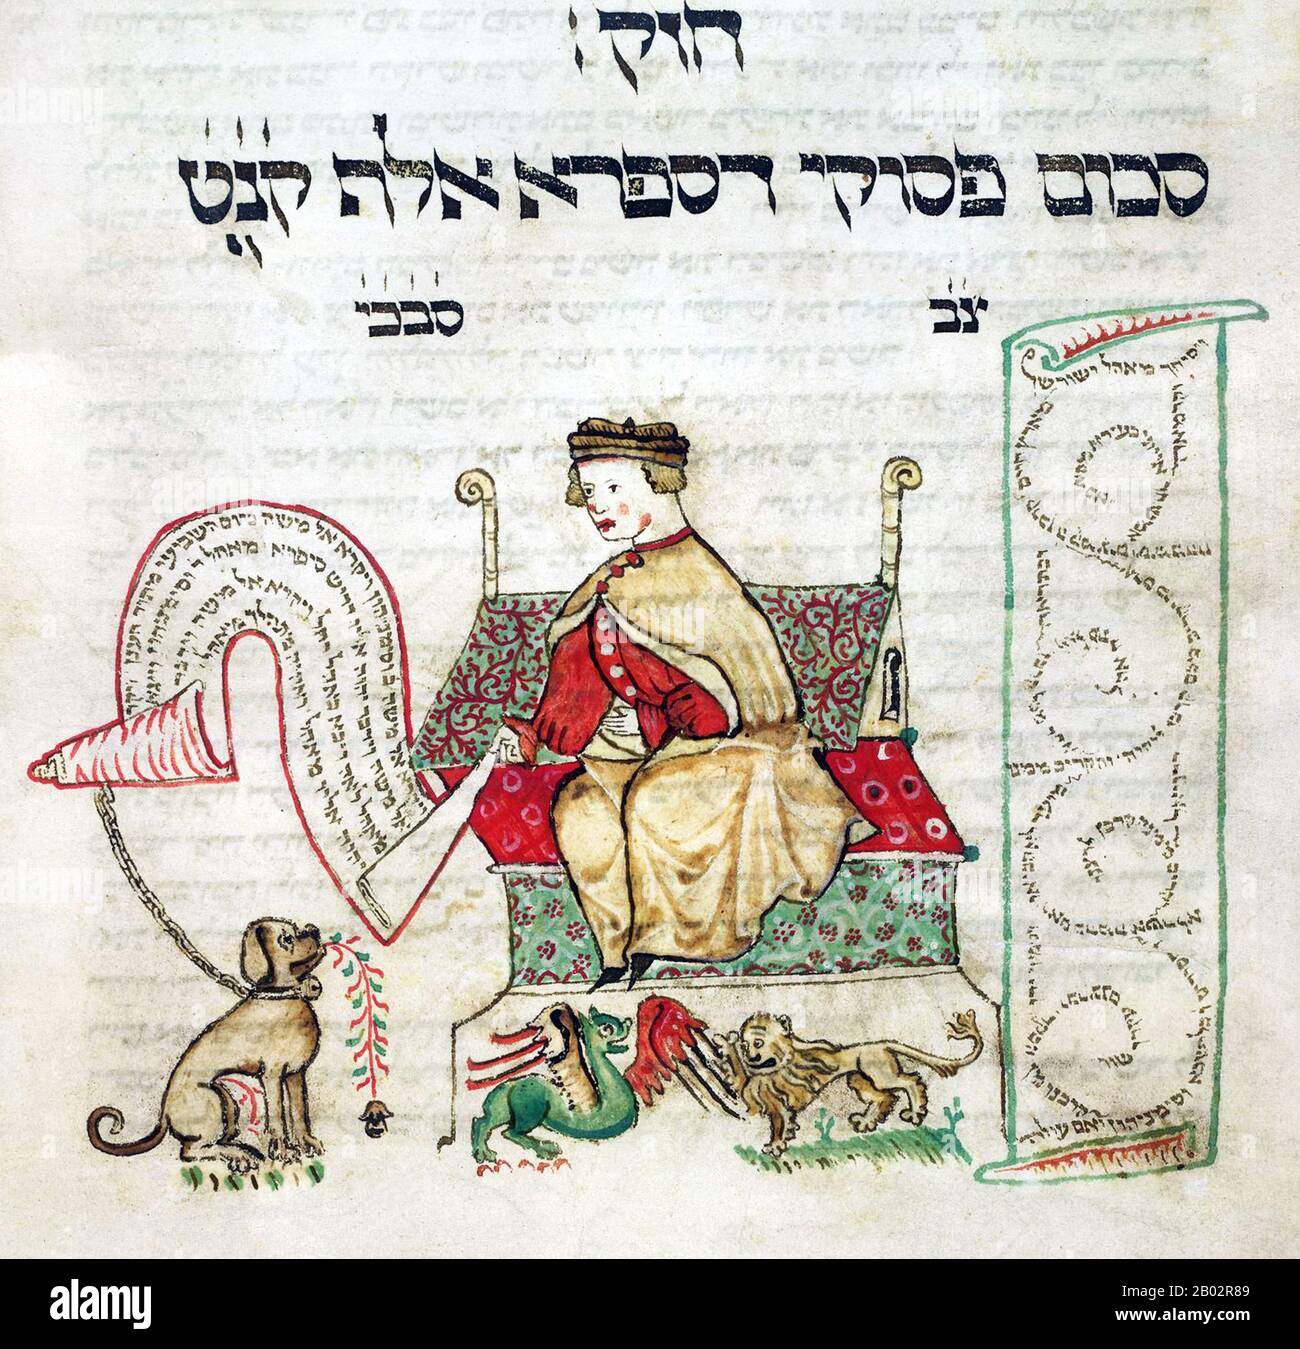 The Coburg Pentateuch, produced c. 1396, includes the Five Books of Moses  (the Torah); the Five Scrolls, Haftarot (weekly readings from the Prophets)  and grammatical treatises. The text of the Pentateuch was